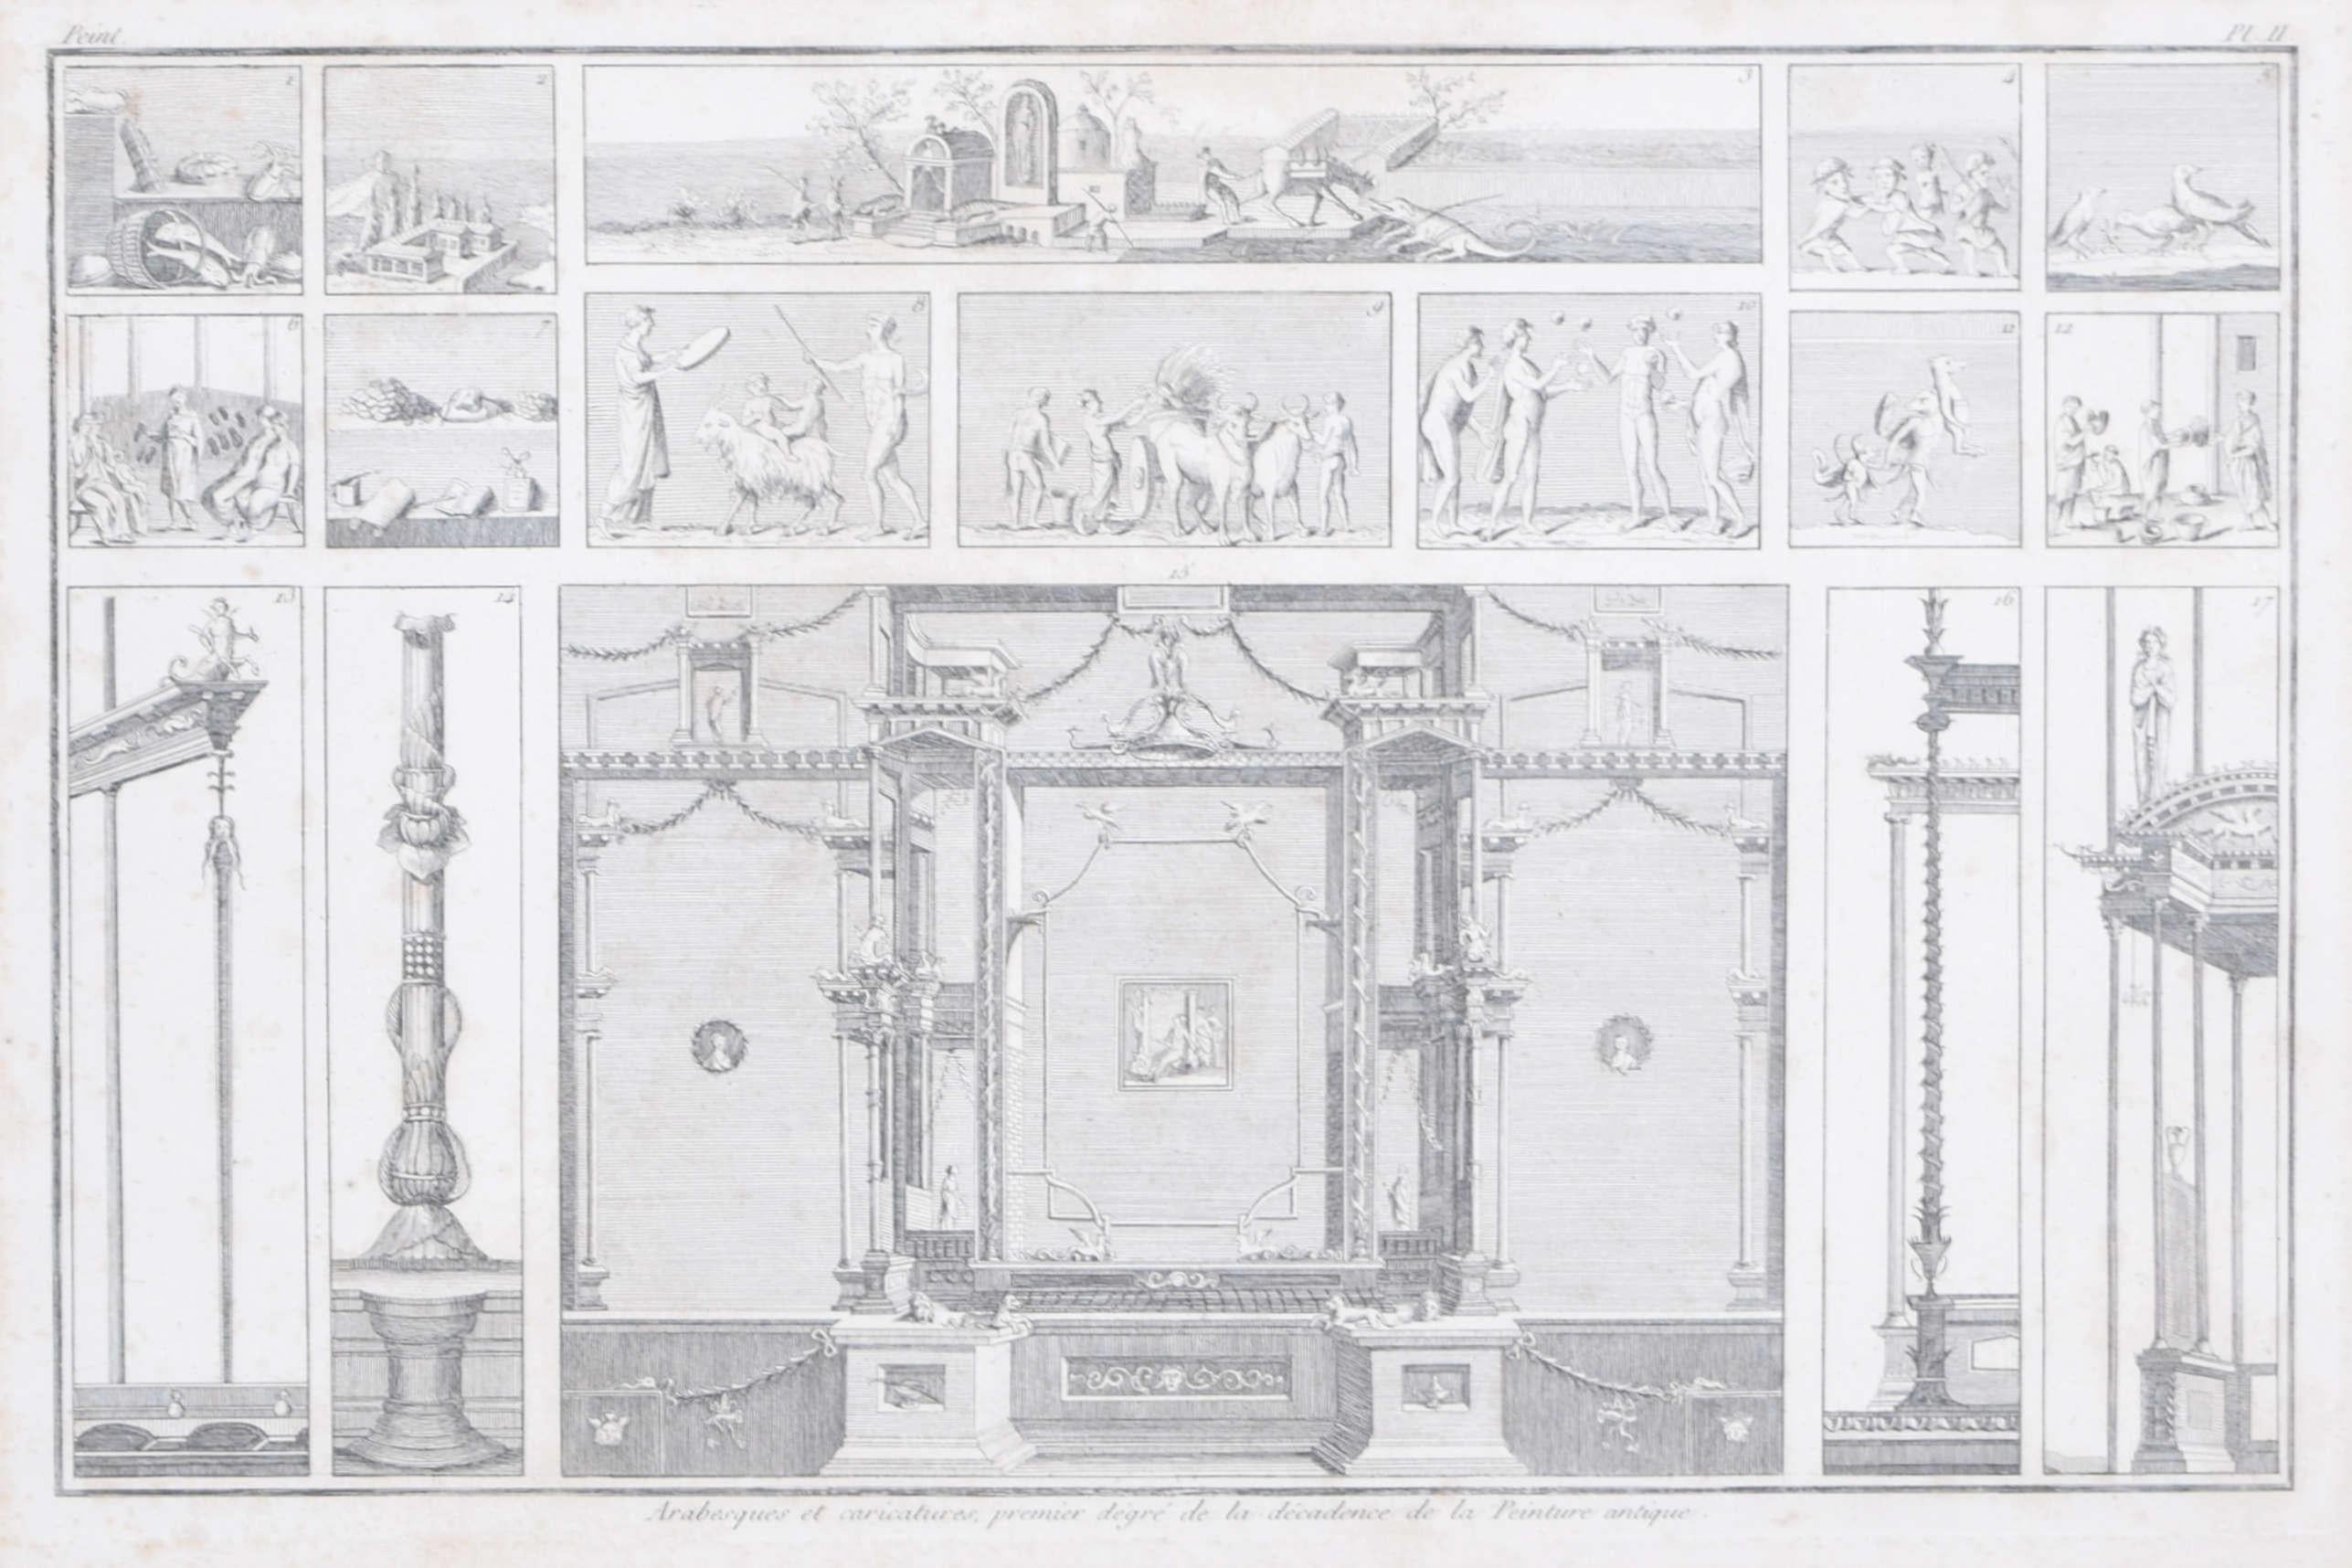 Unknown Interior Print - Arabesques and caricatures antiquities engraving